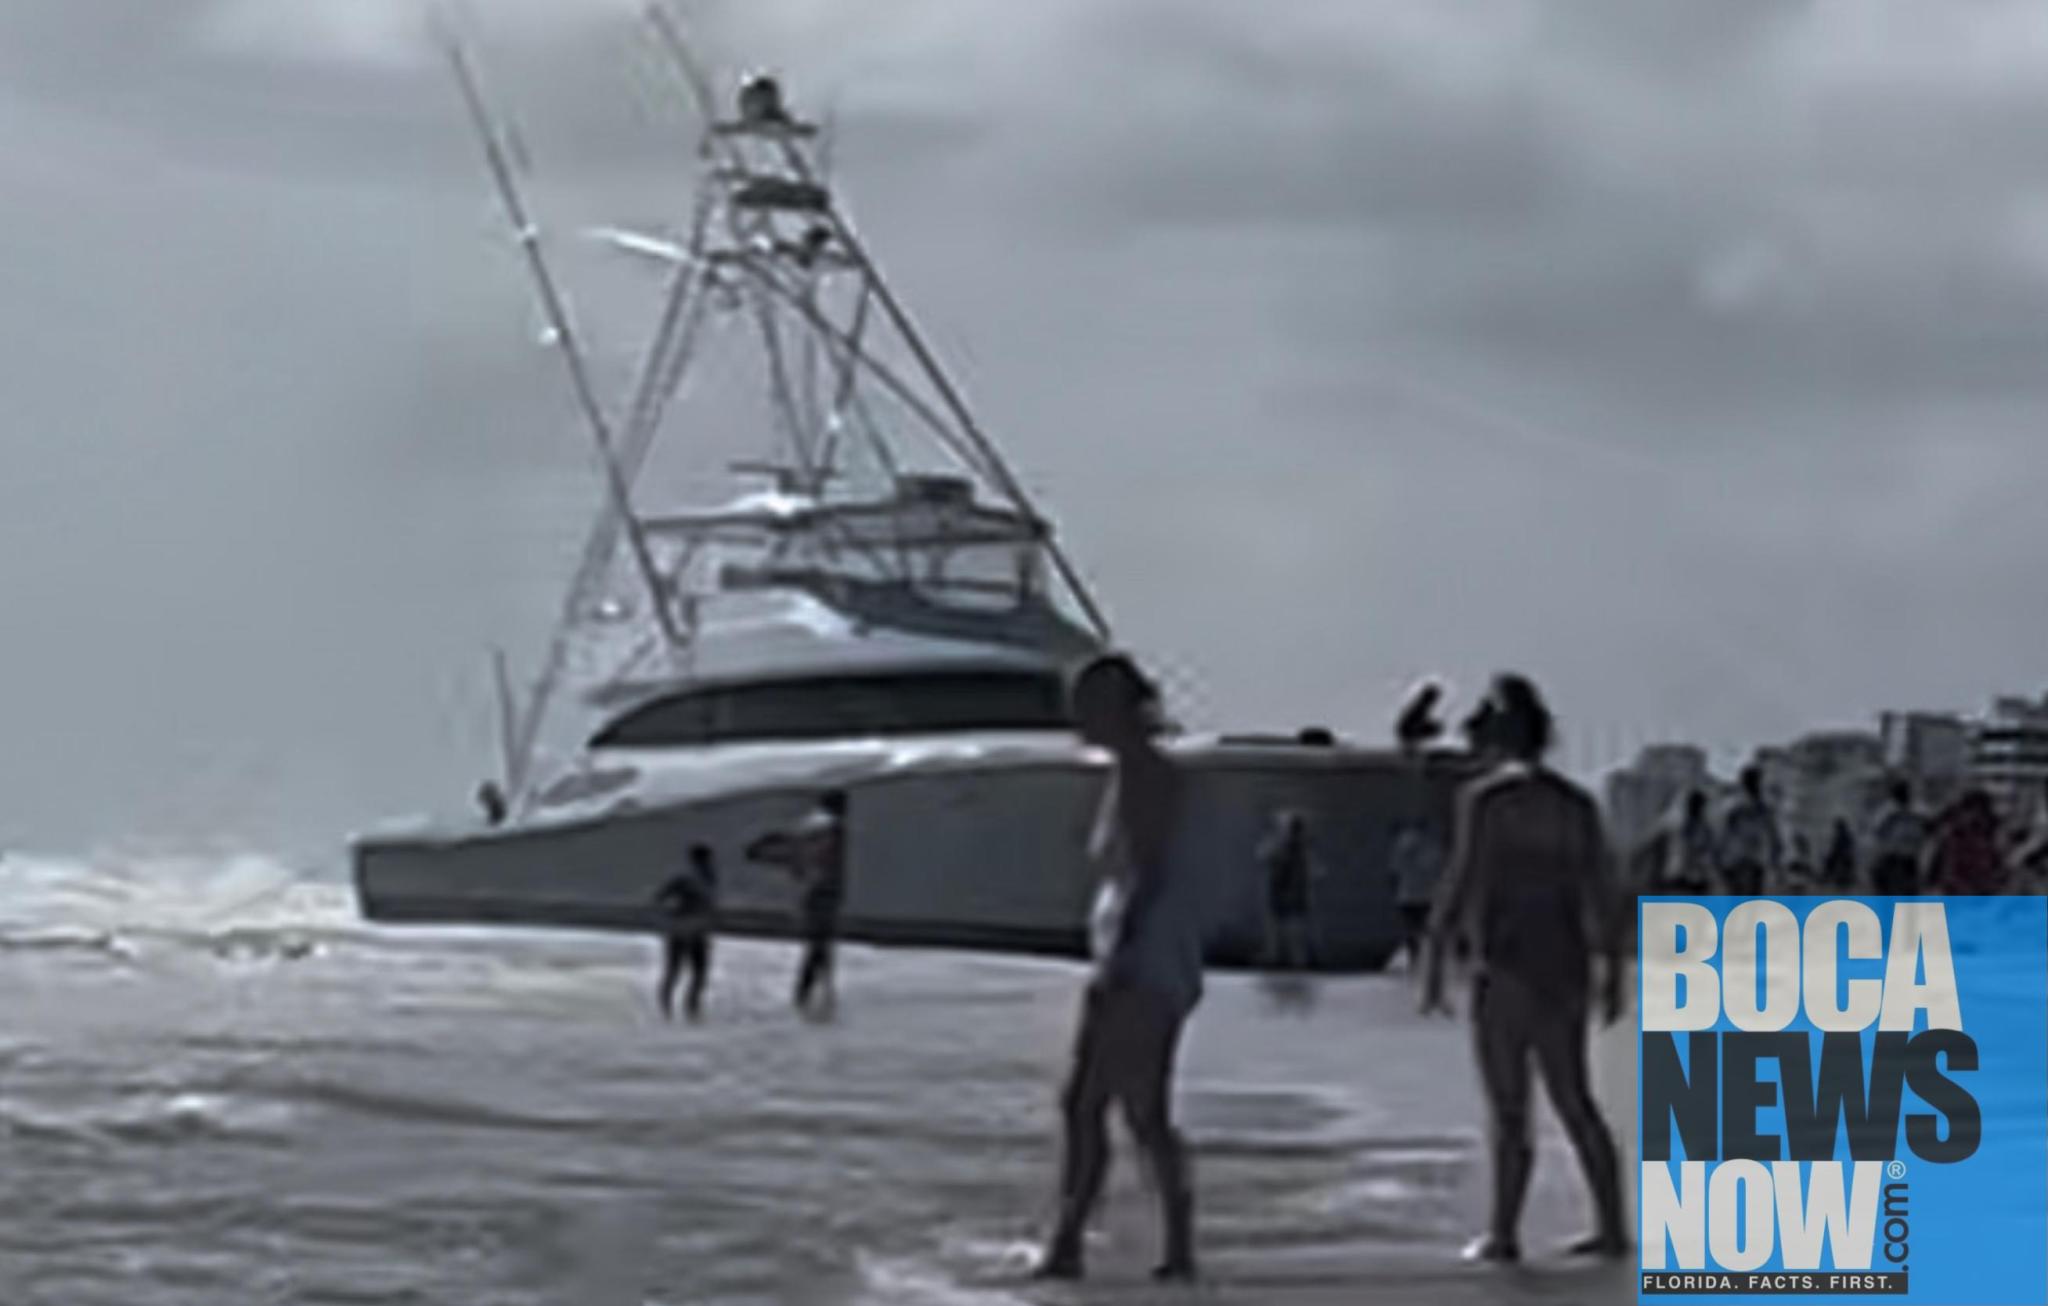 viking yacht beached in delray beach florida